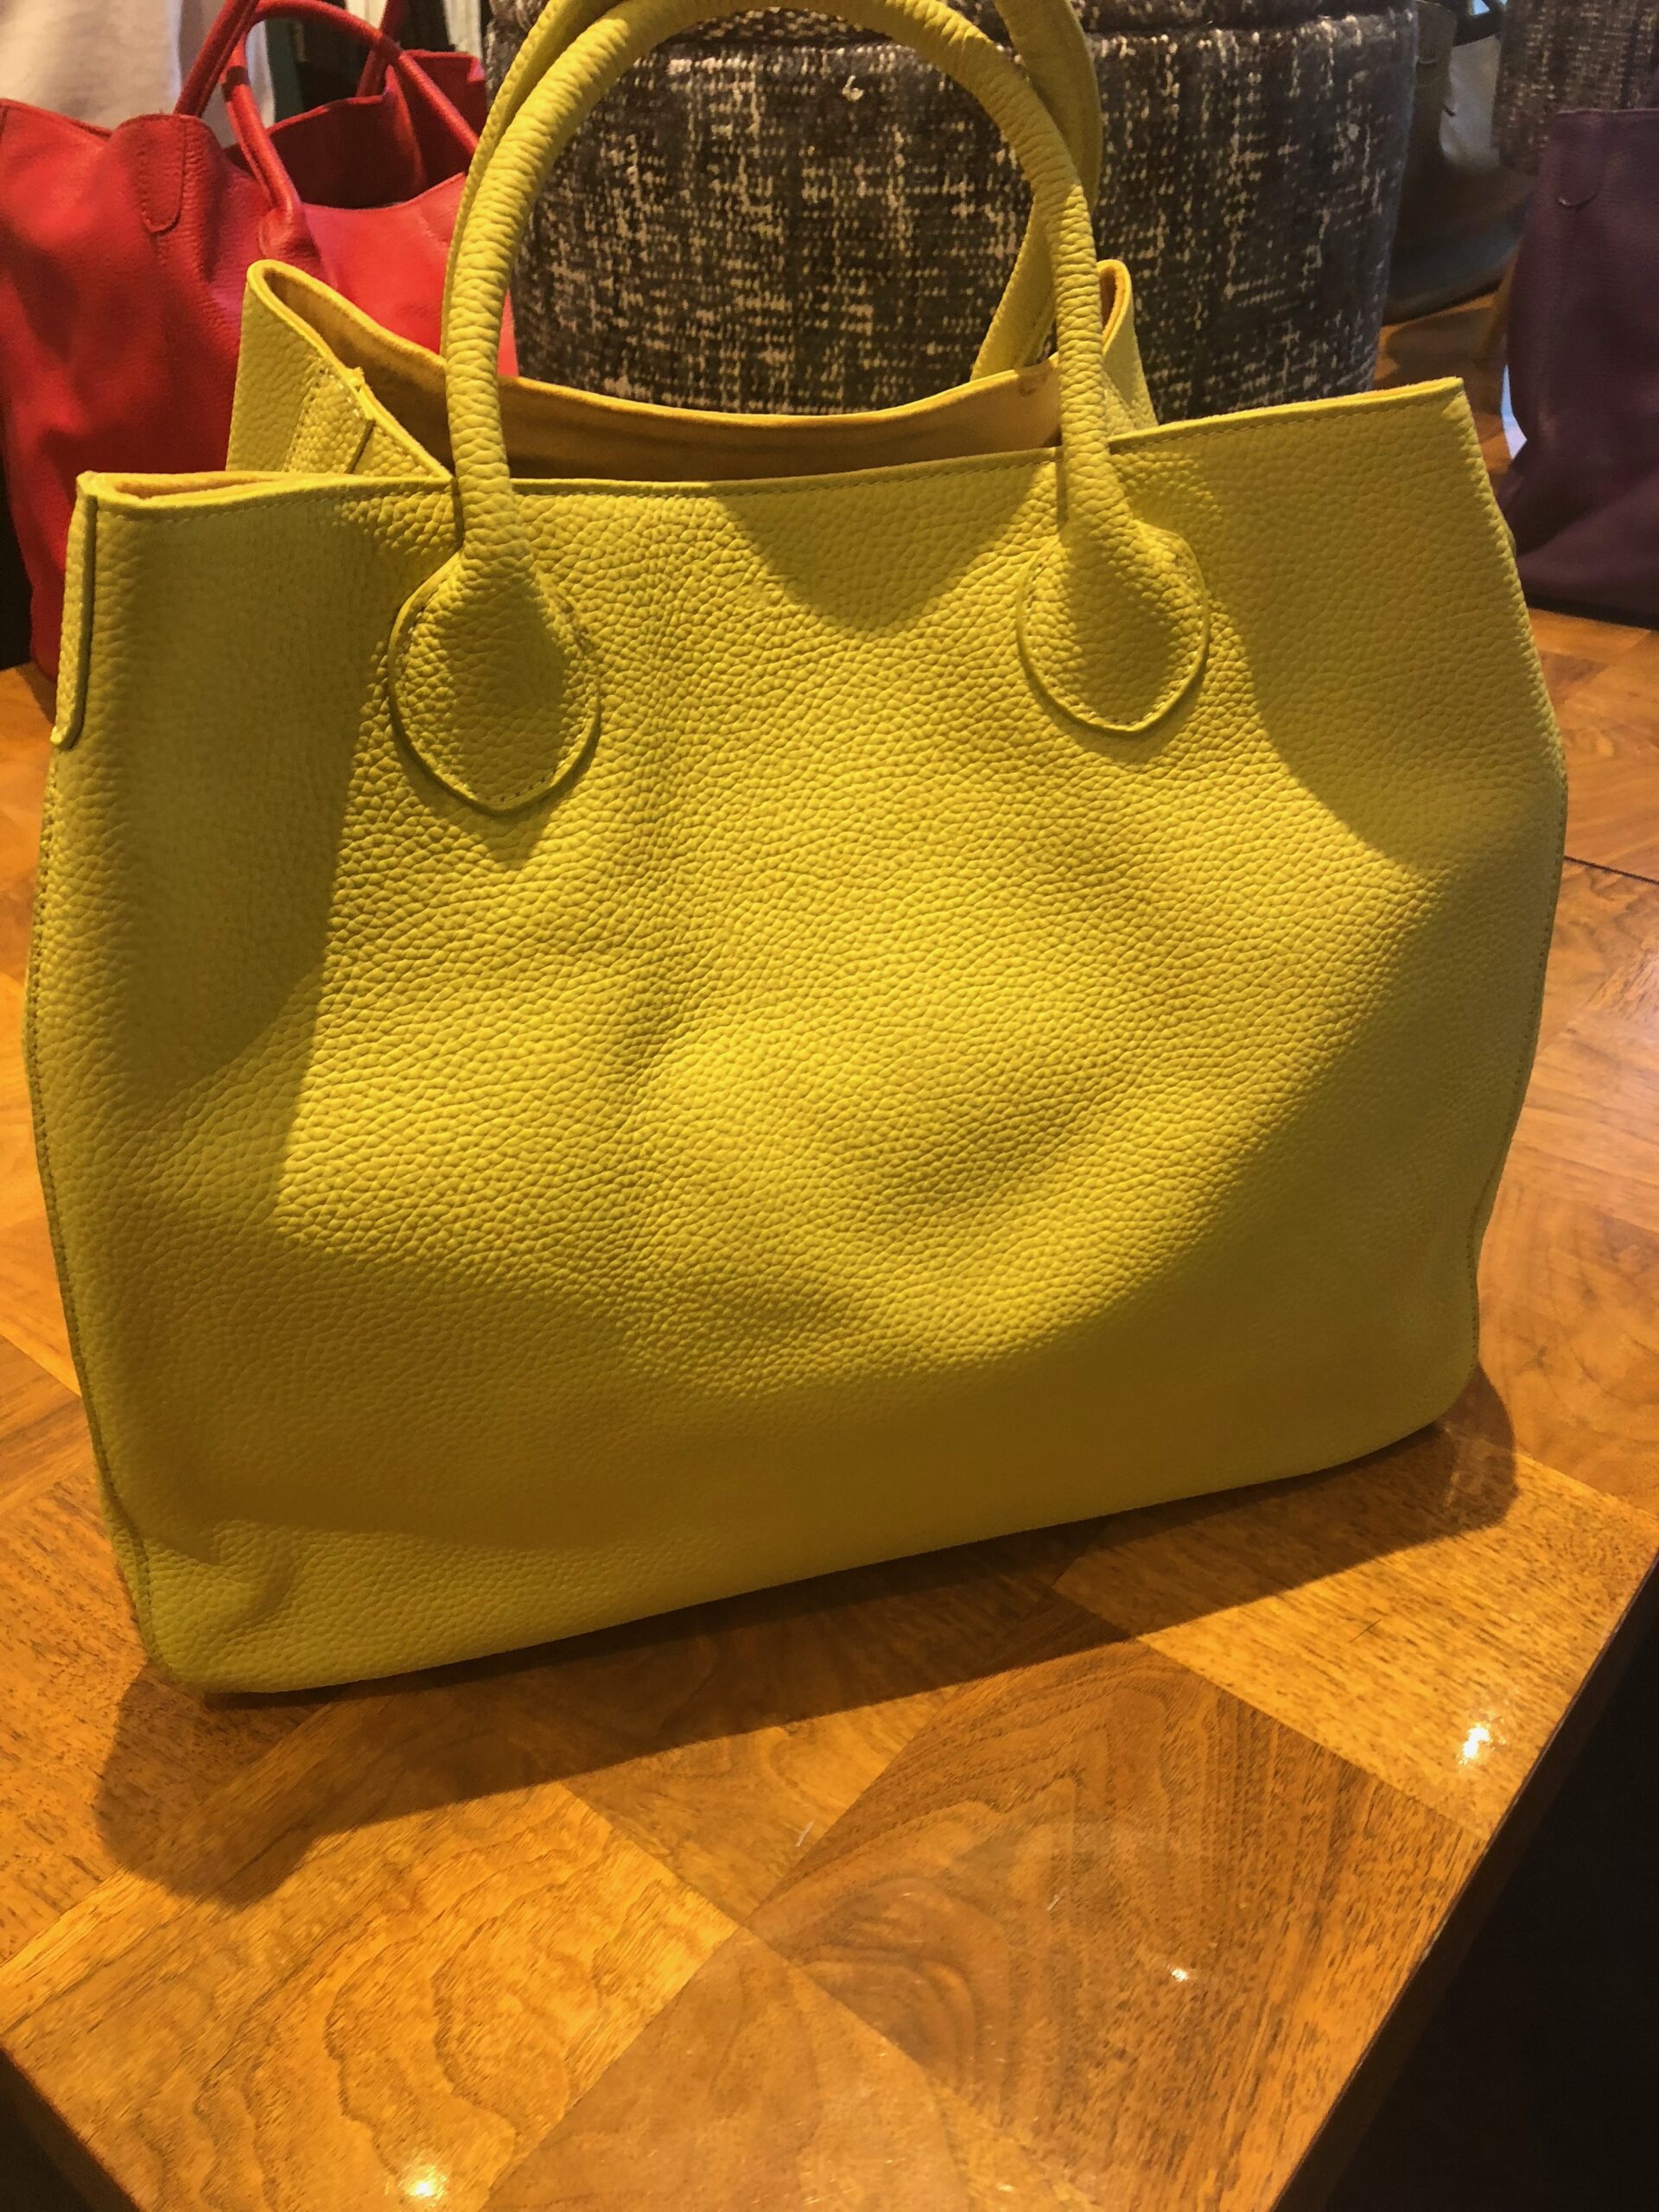 Beck Bag Brand Launch : Every woman is a beck girl - The Garnette Report